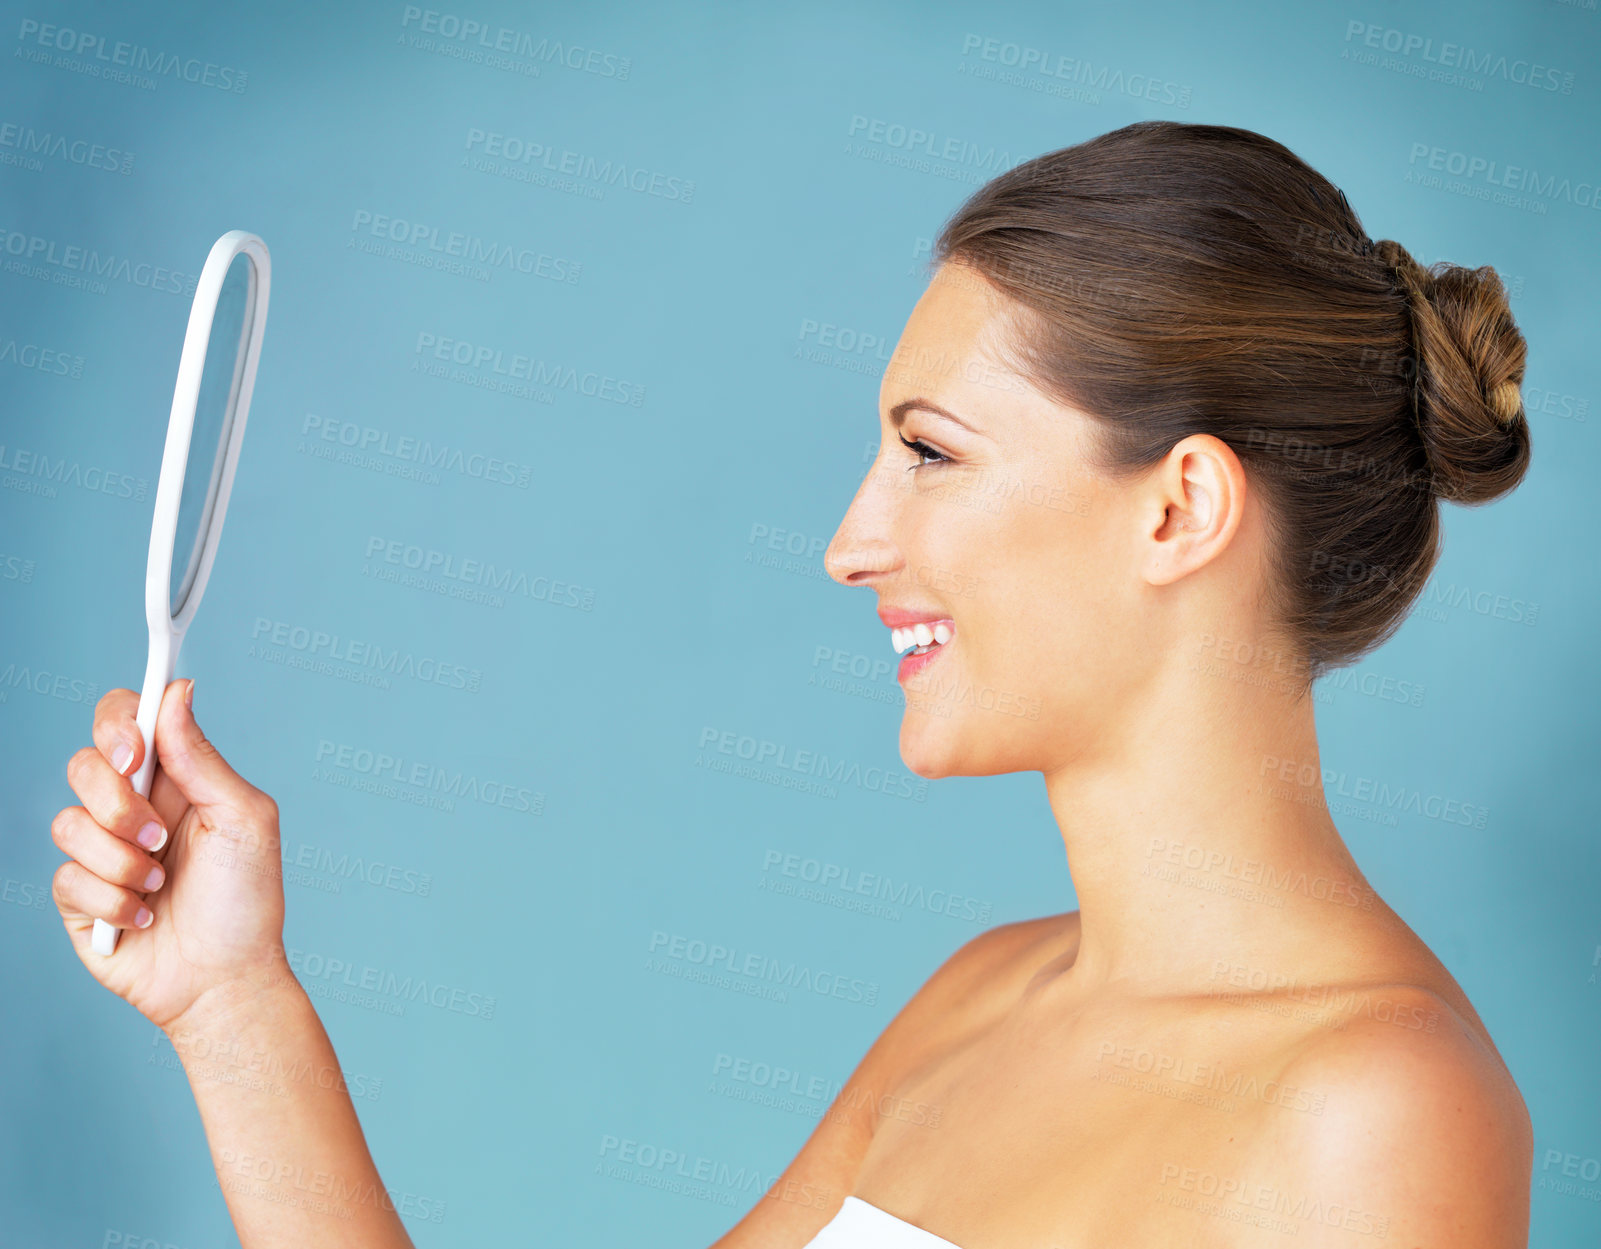 Buy stock photo Studio shot of a beautiful young woman looking at herself in the mirror against a blue background